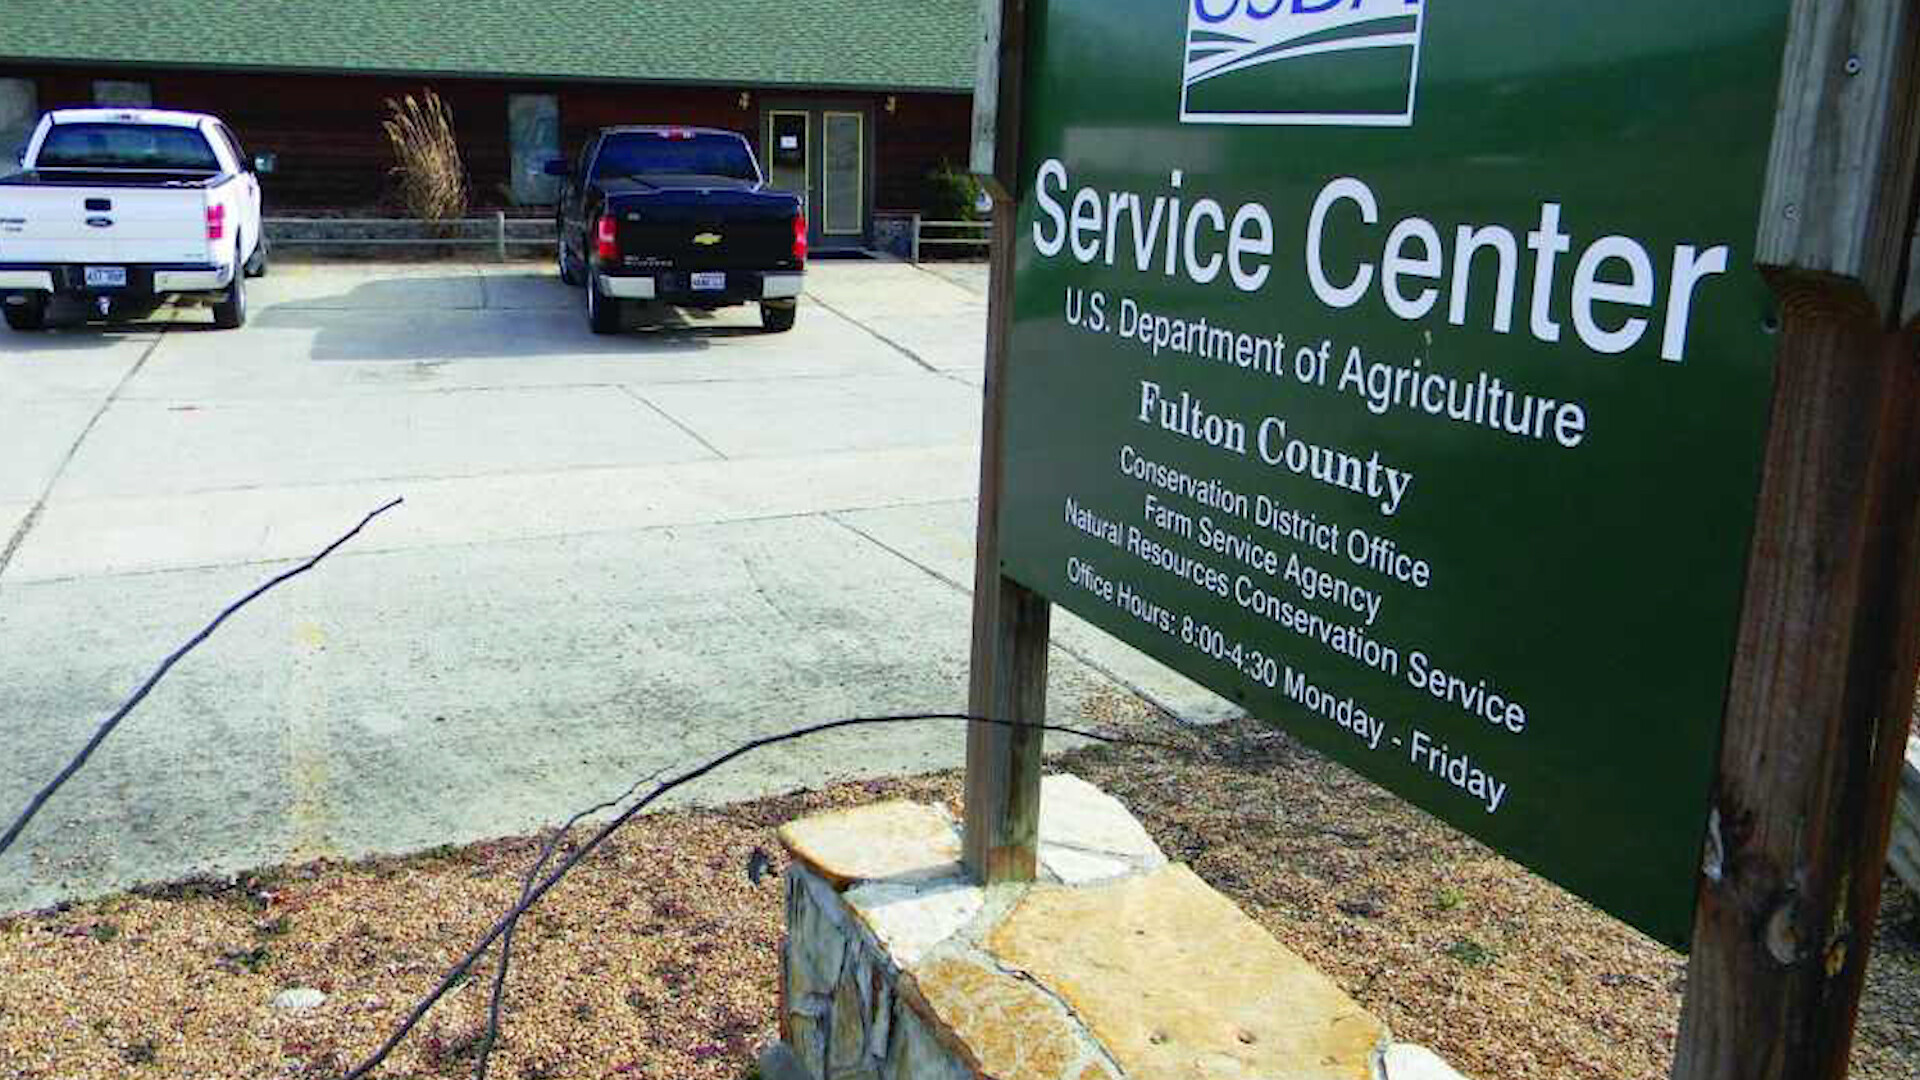 Farm Service Agency County Committee Elections Underway